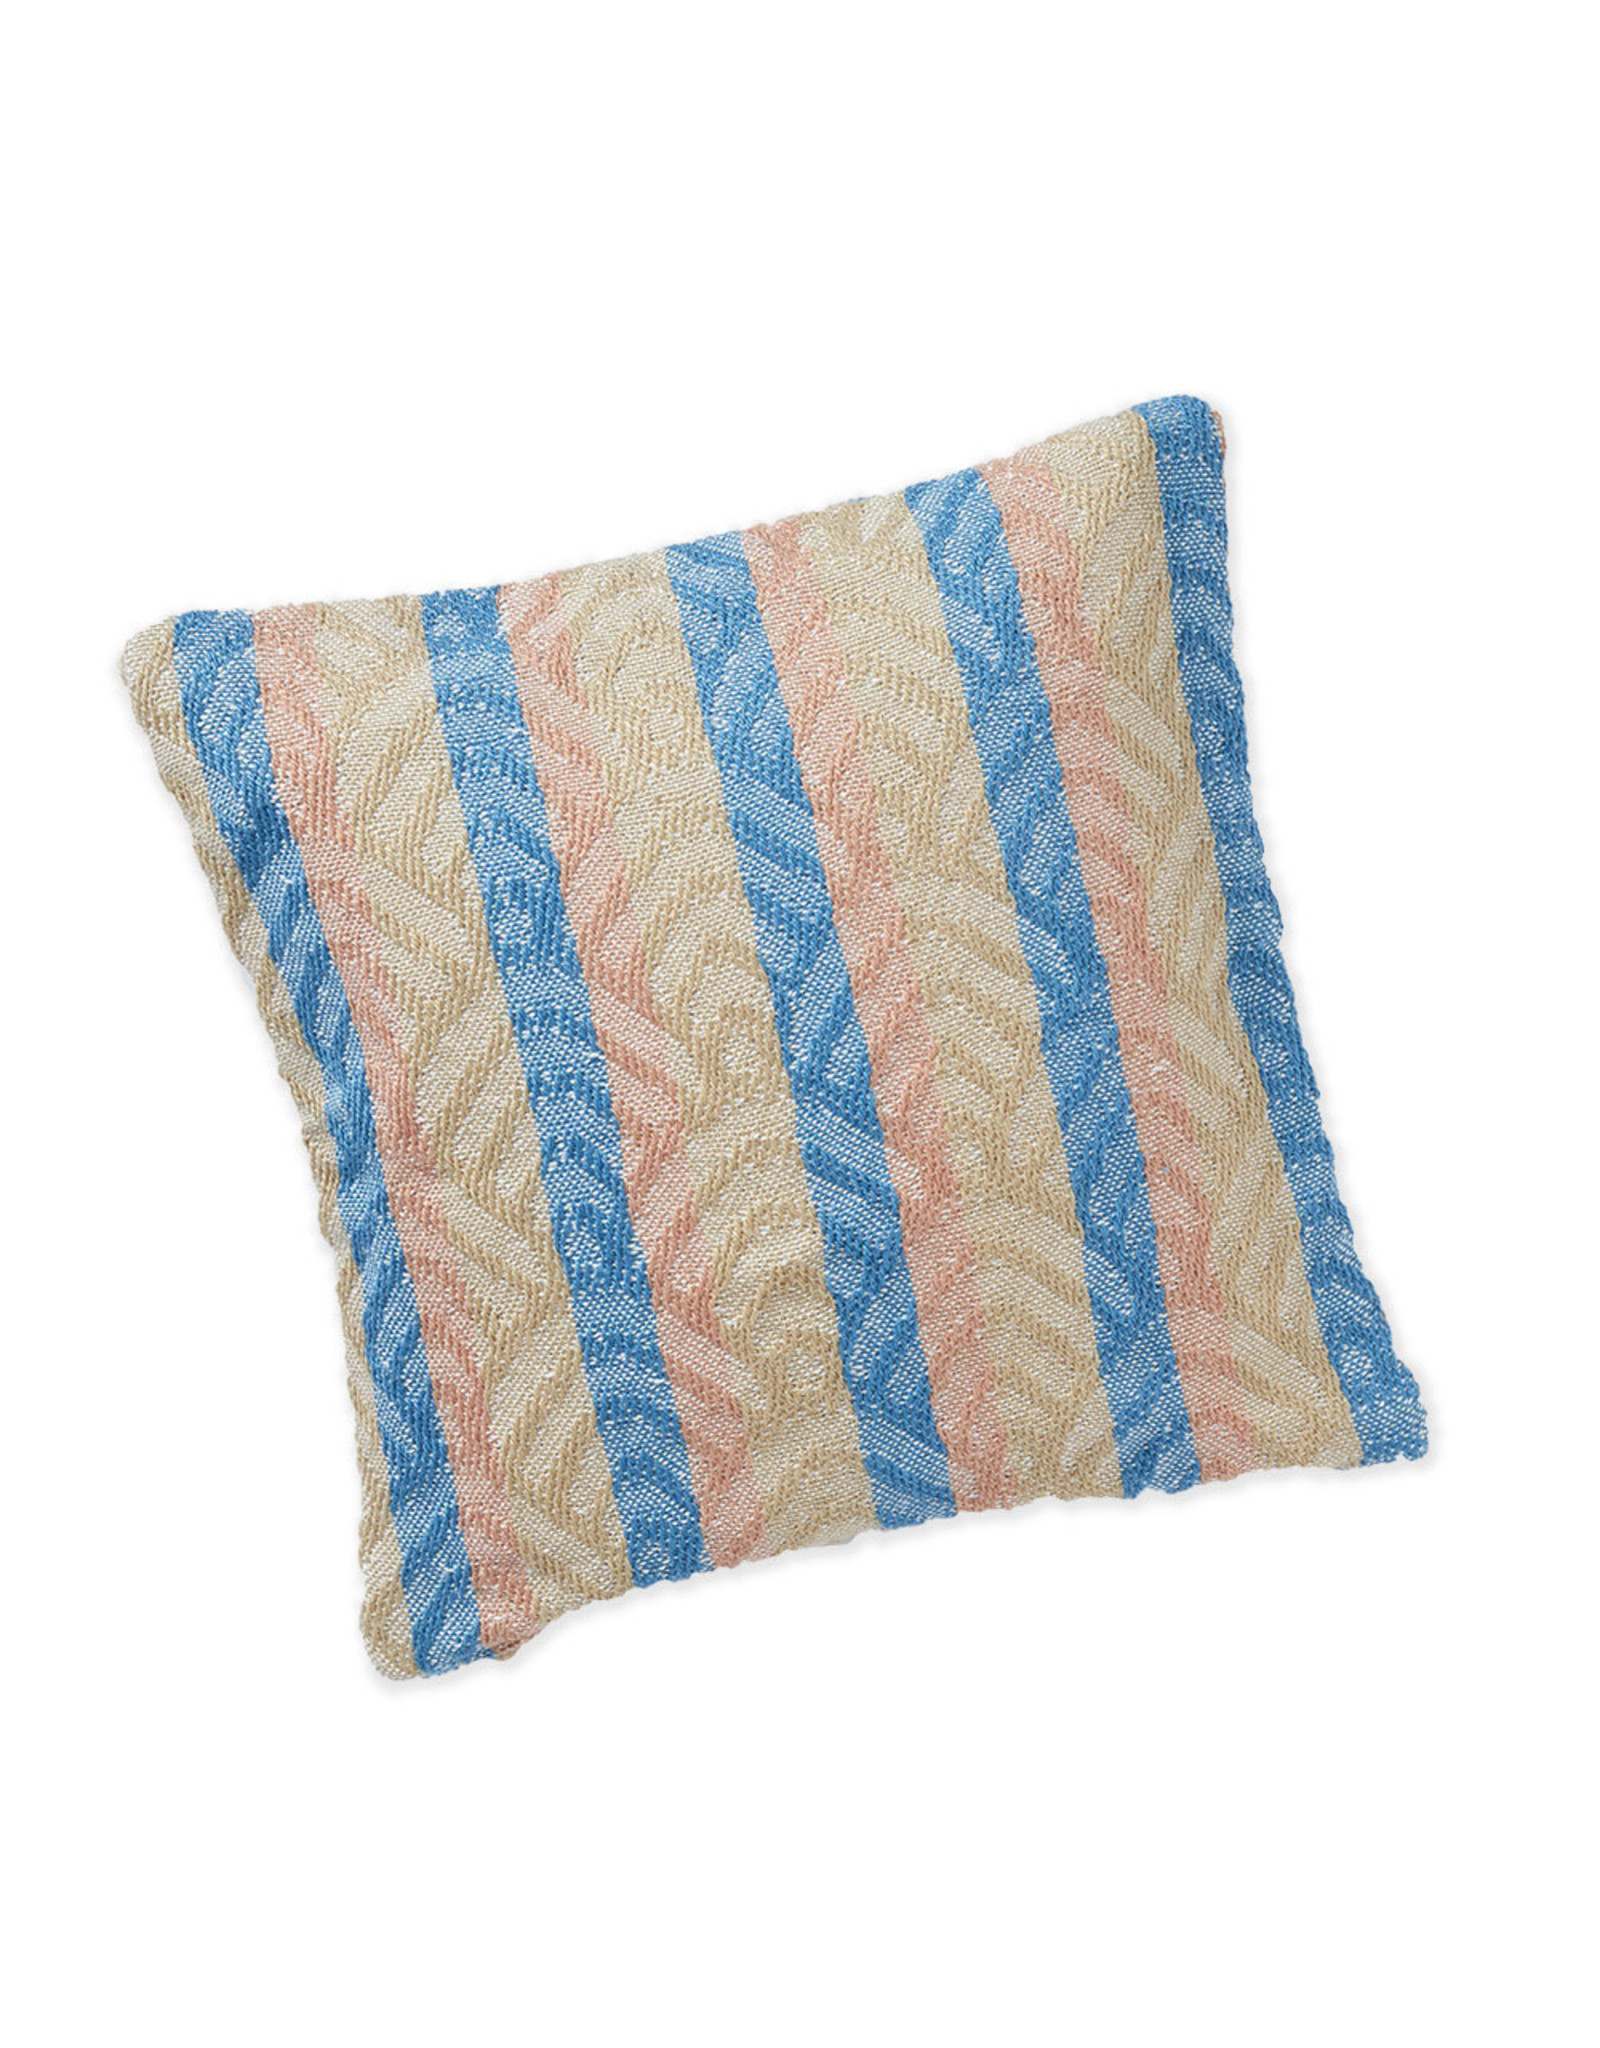 India Seashell Recycled PET Bottle Pillow, India